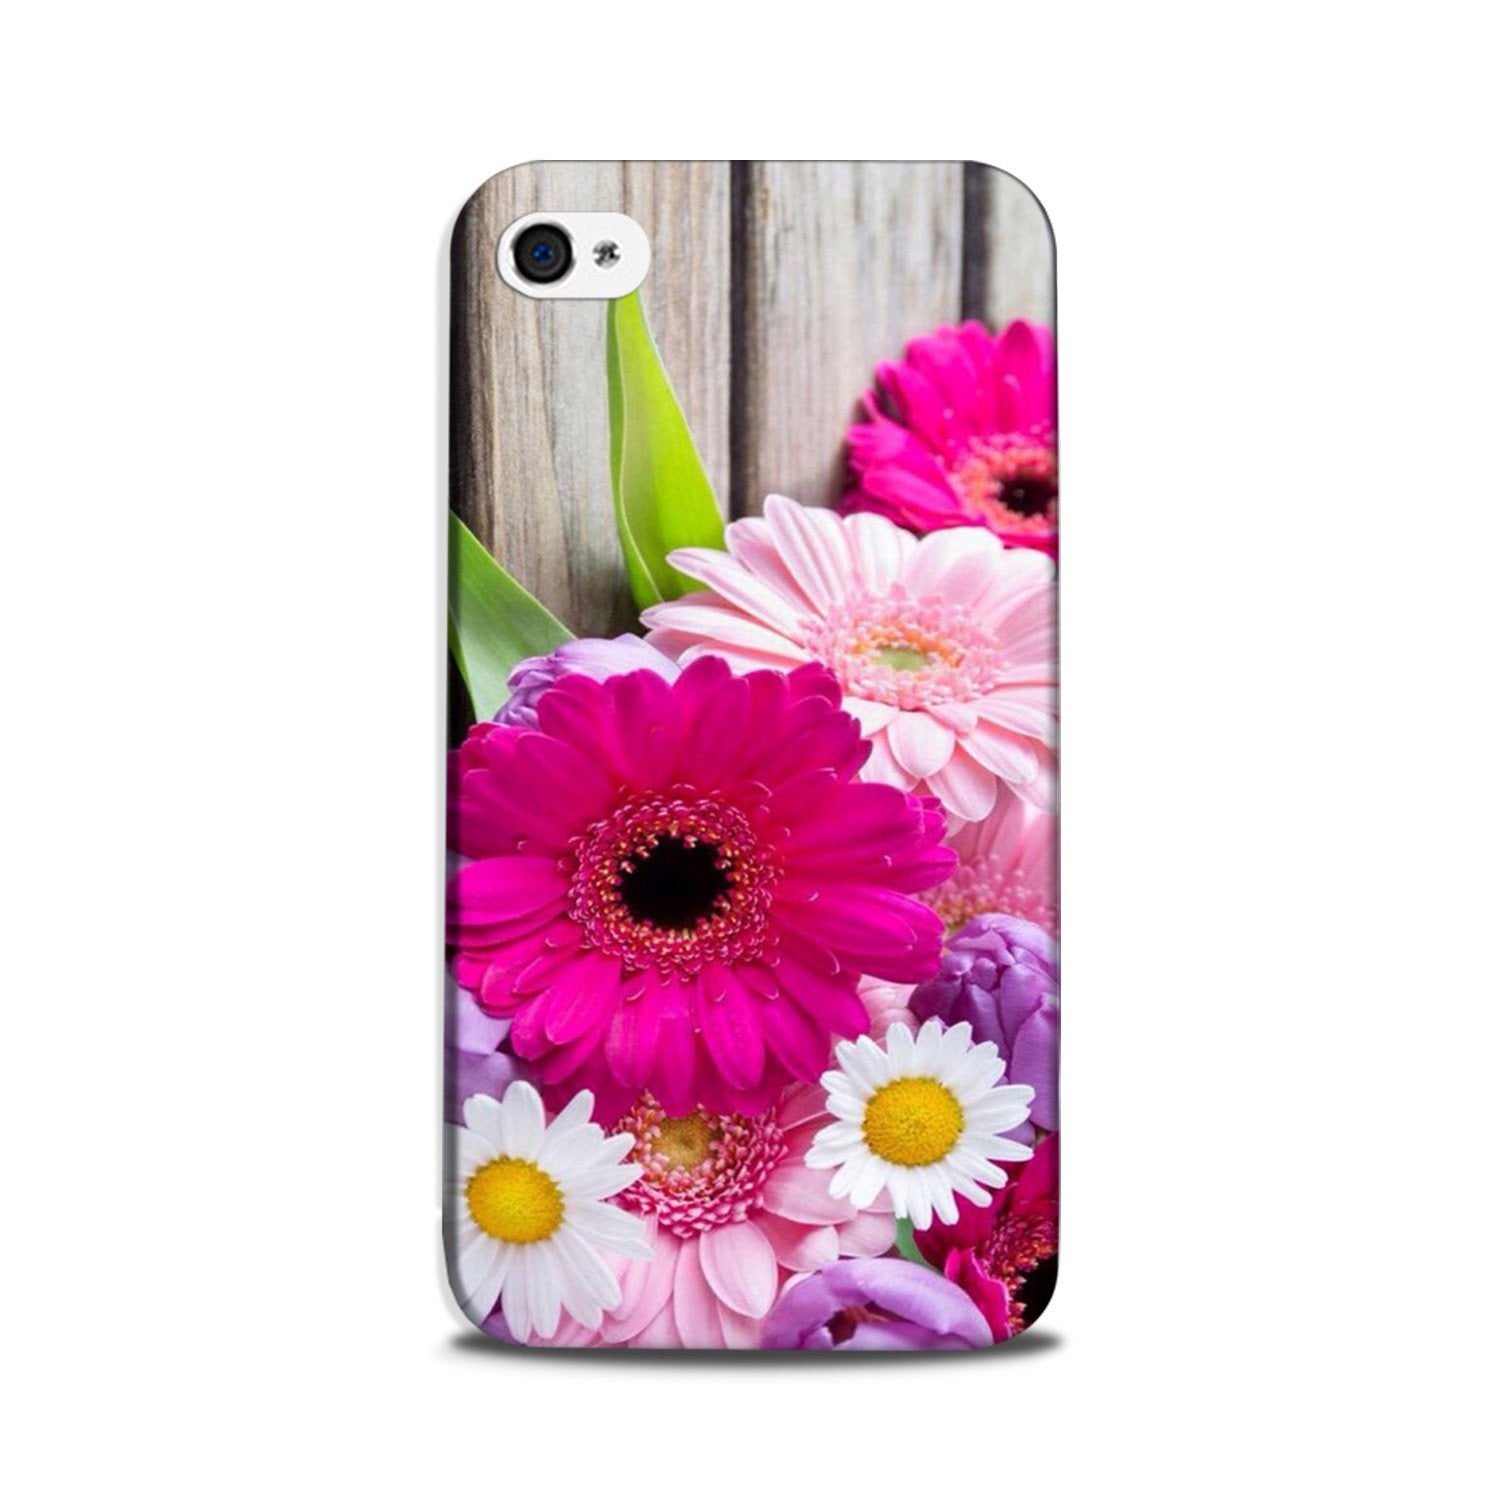 Coloful Daisy2 Case for iPhone 5/ 5s